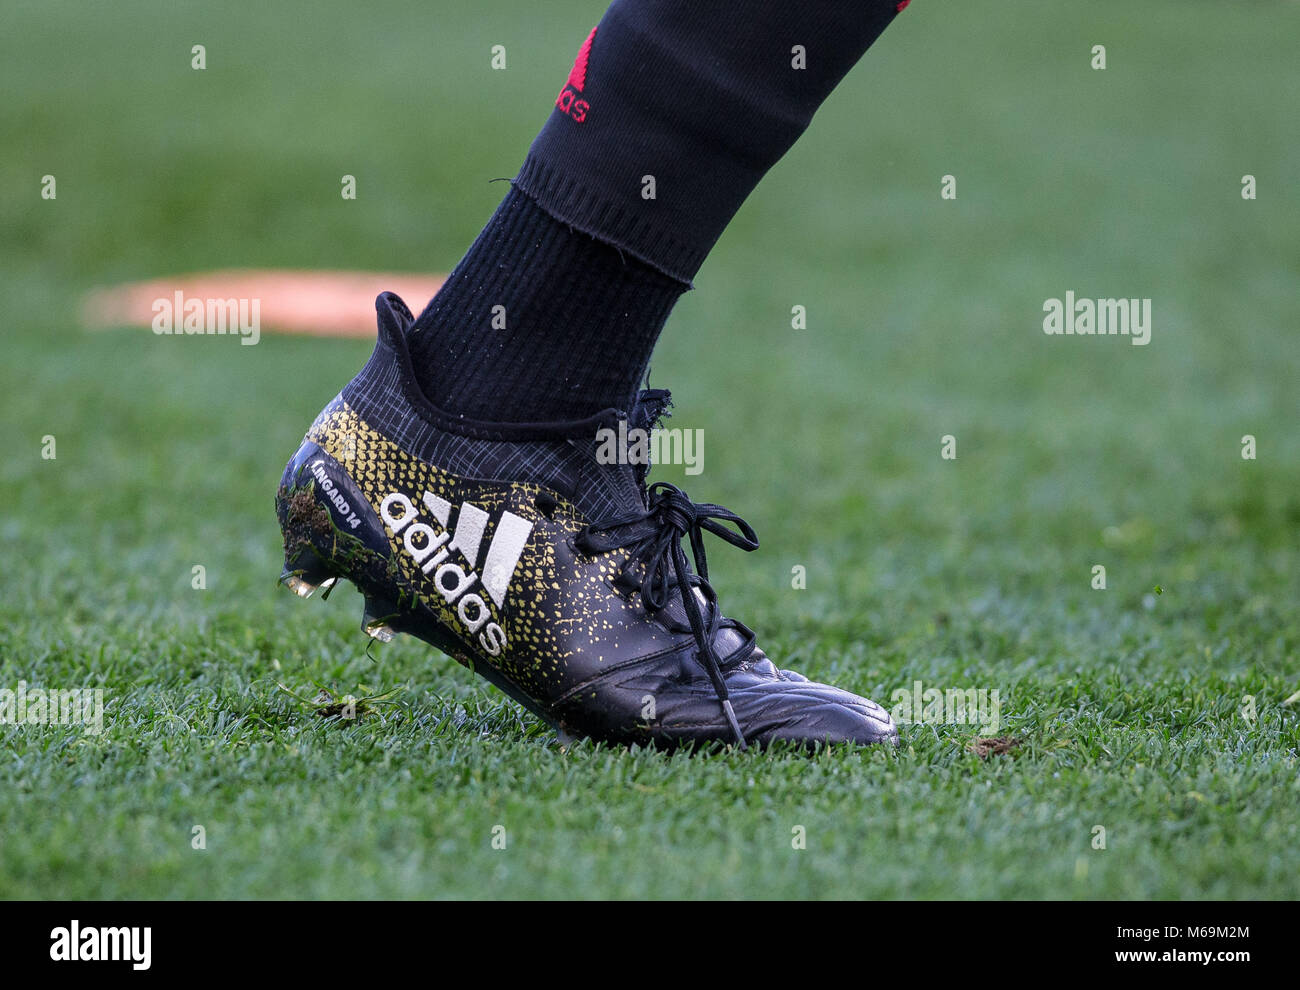 Jesse Lingard of Manchester United sock & adidas boot during the EPL -  Premier League match between Chelsea and Manchester United at Stamford  Bridge Stock Photo - Alamy